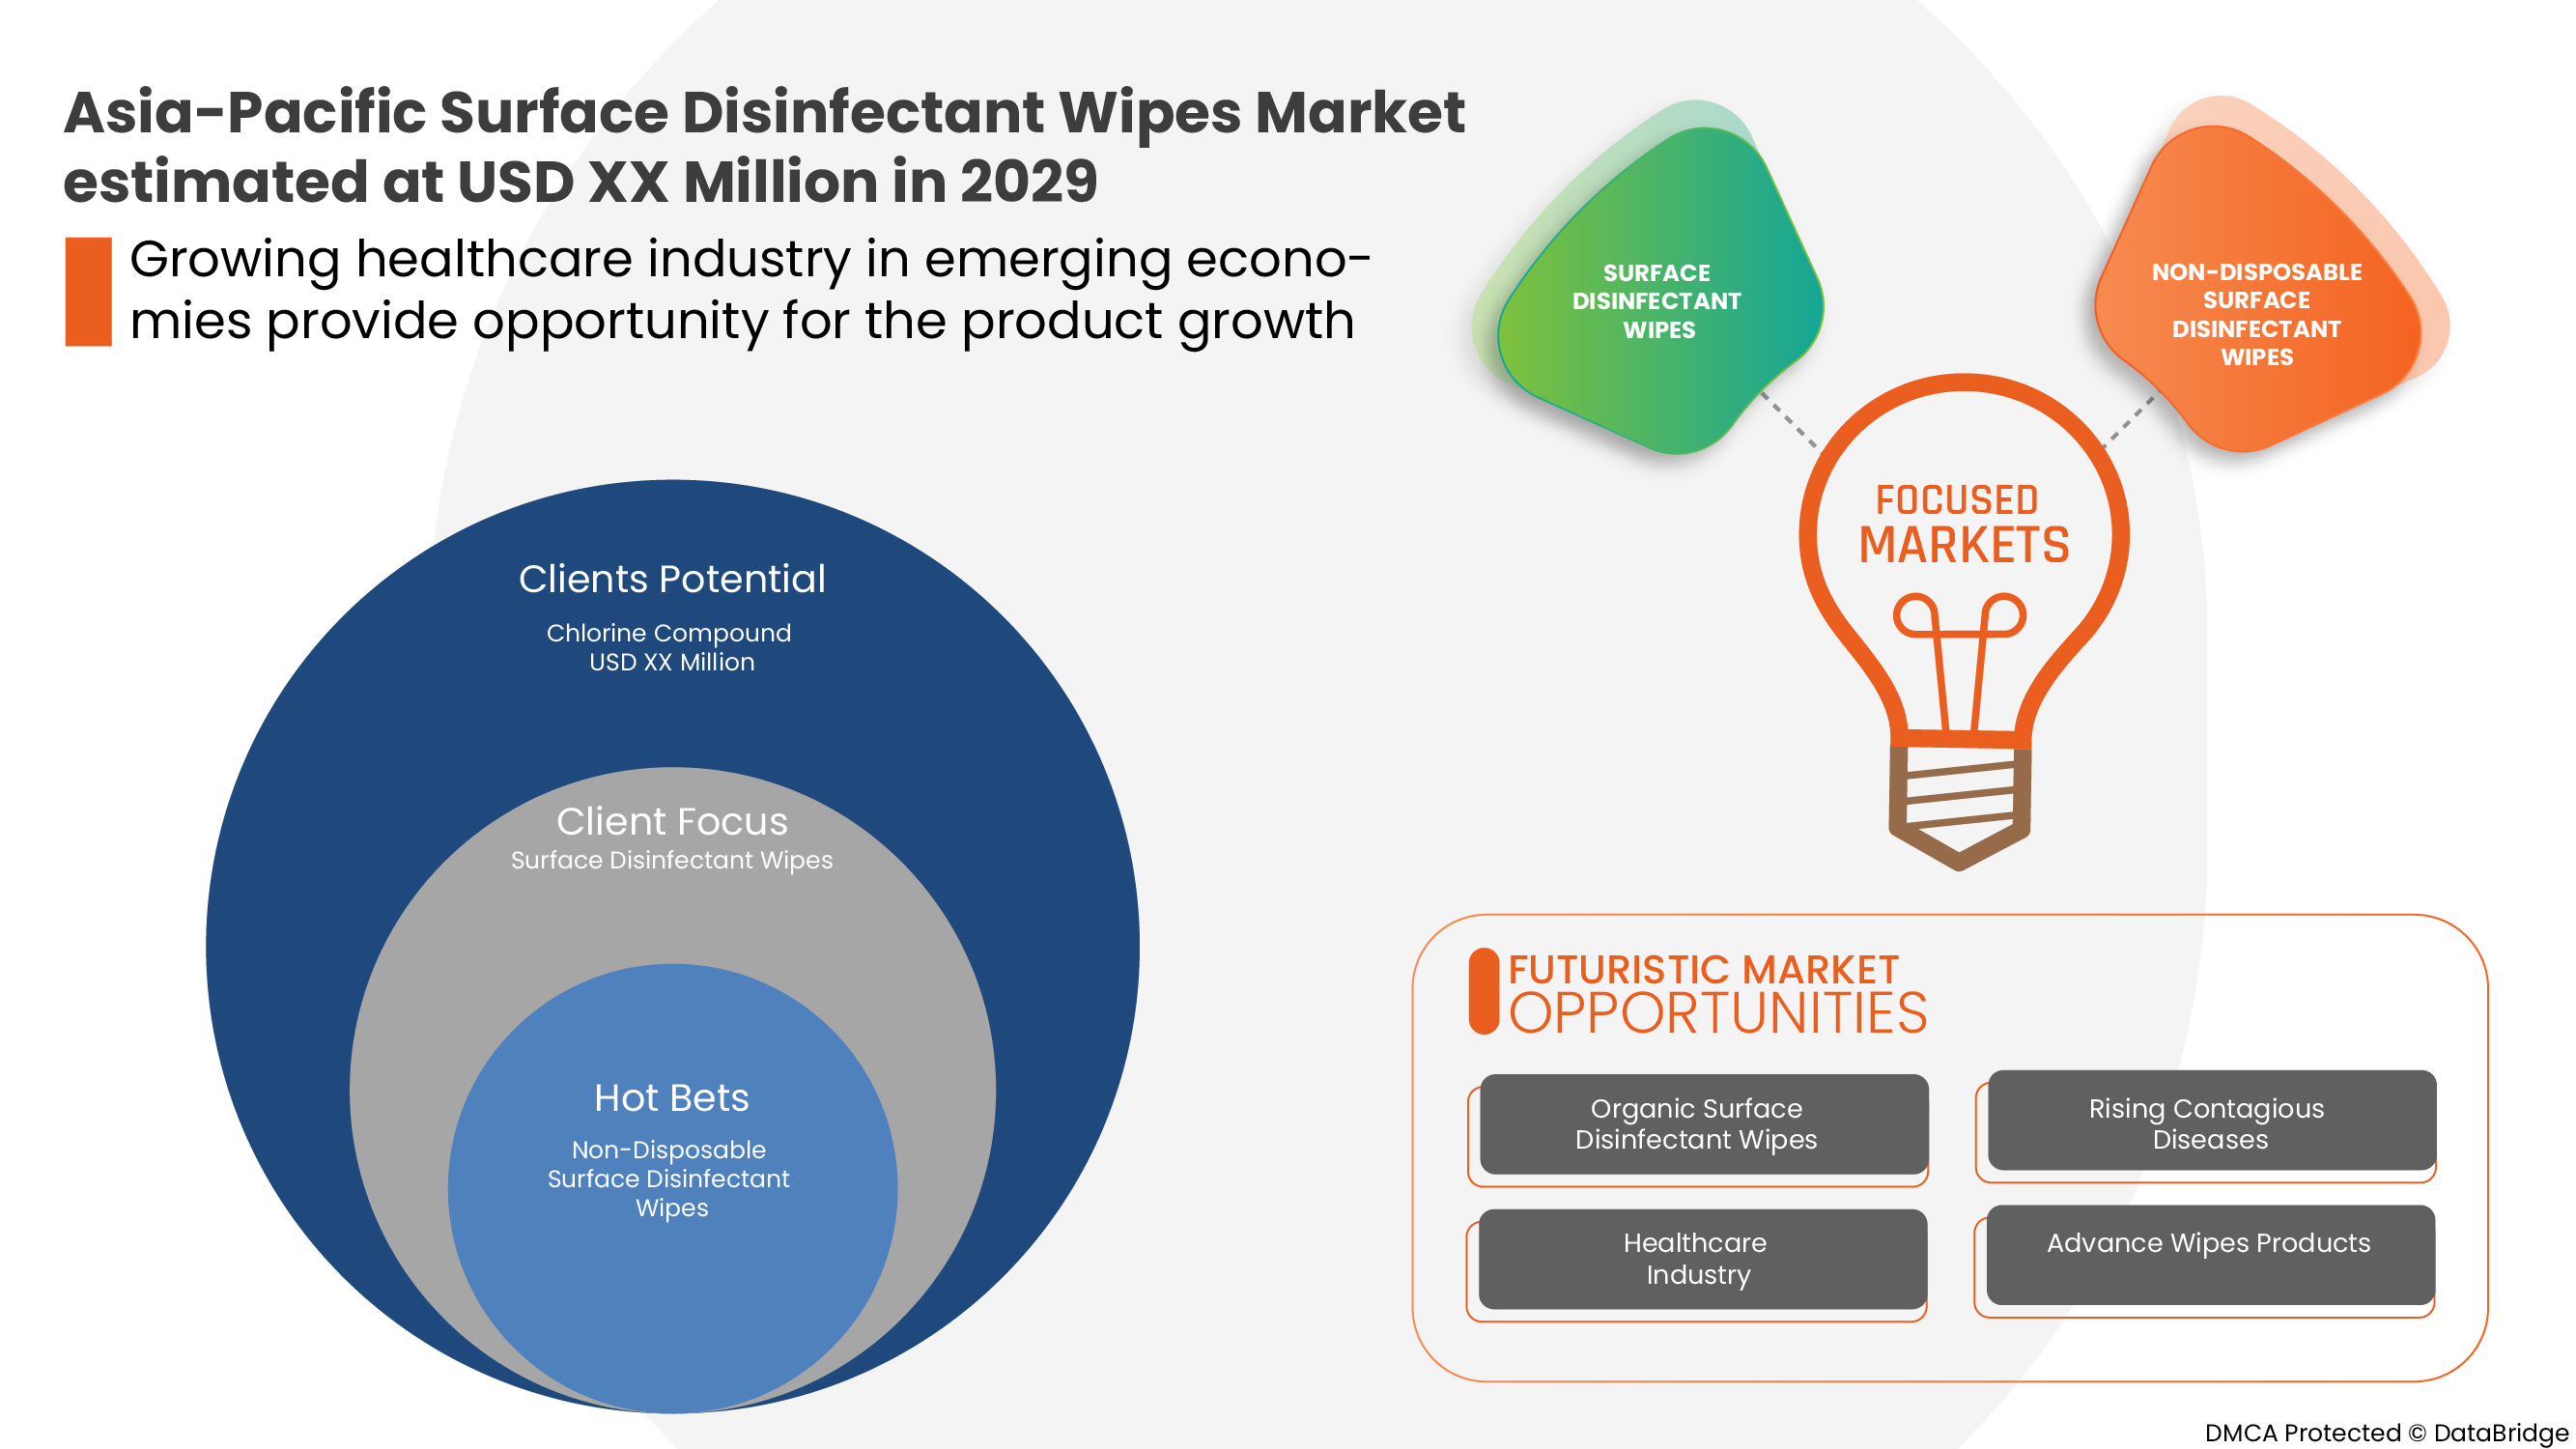 Asia-Pacific Surface Disinfectant Wipes Market